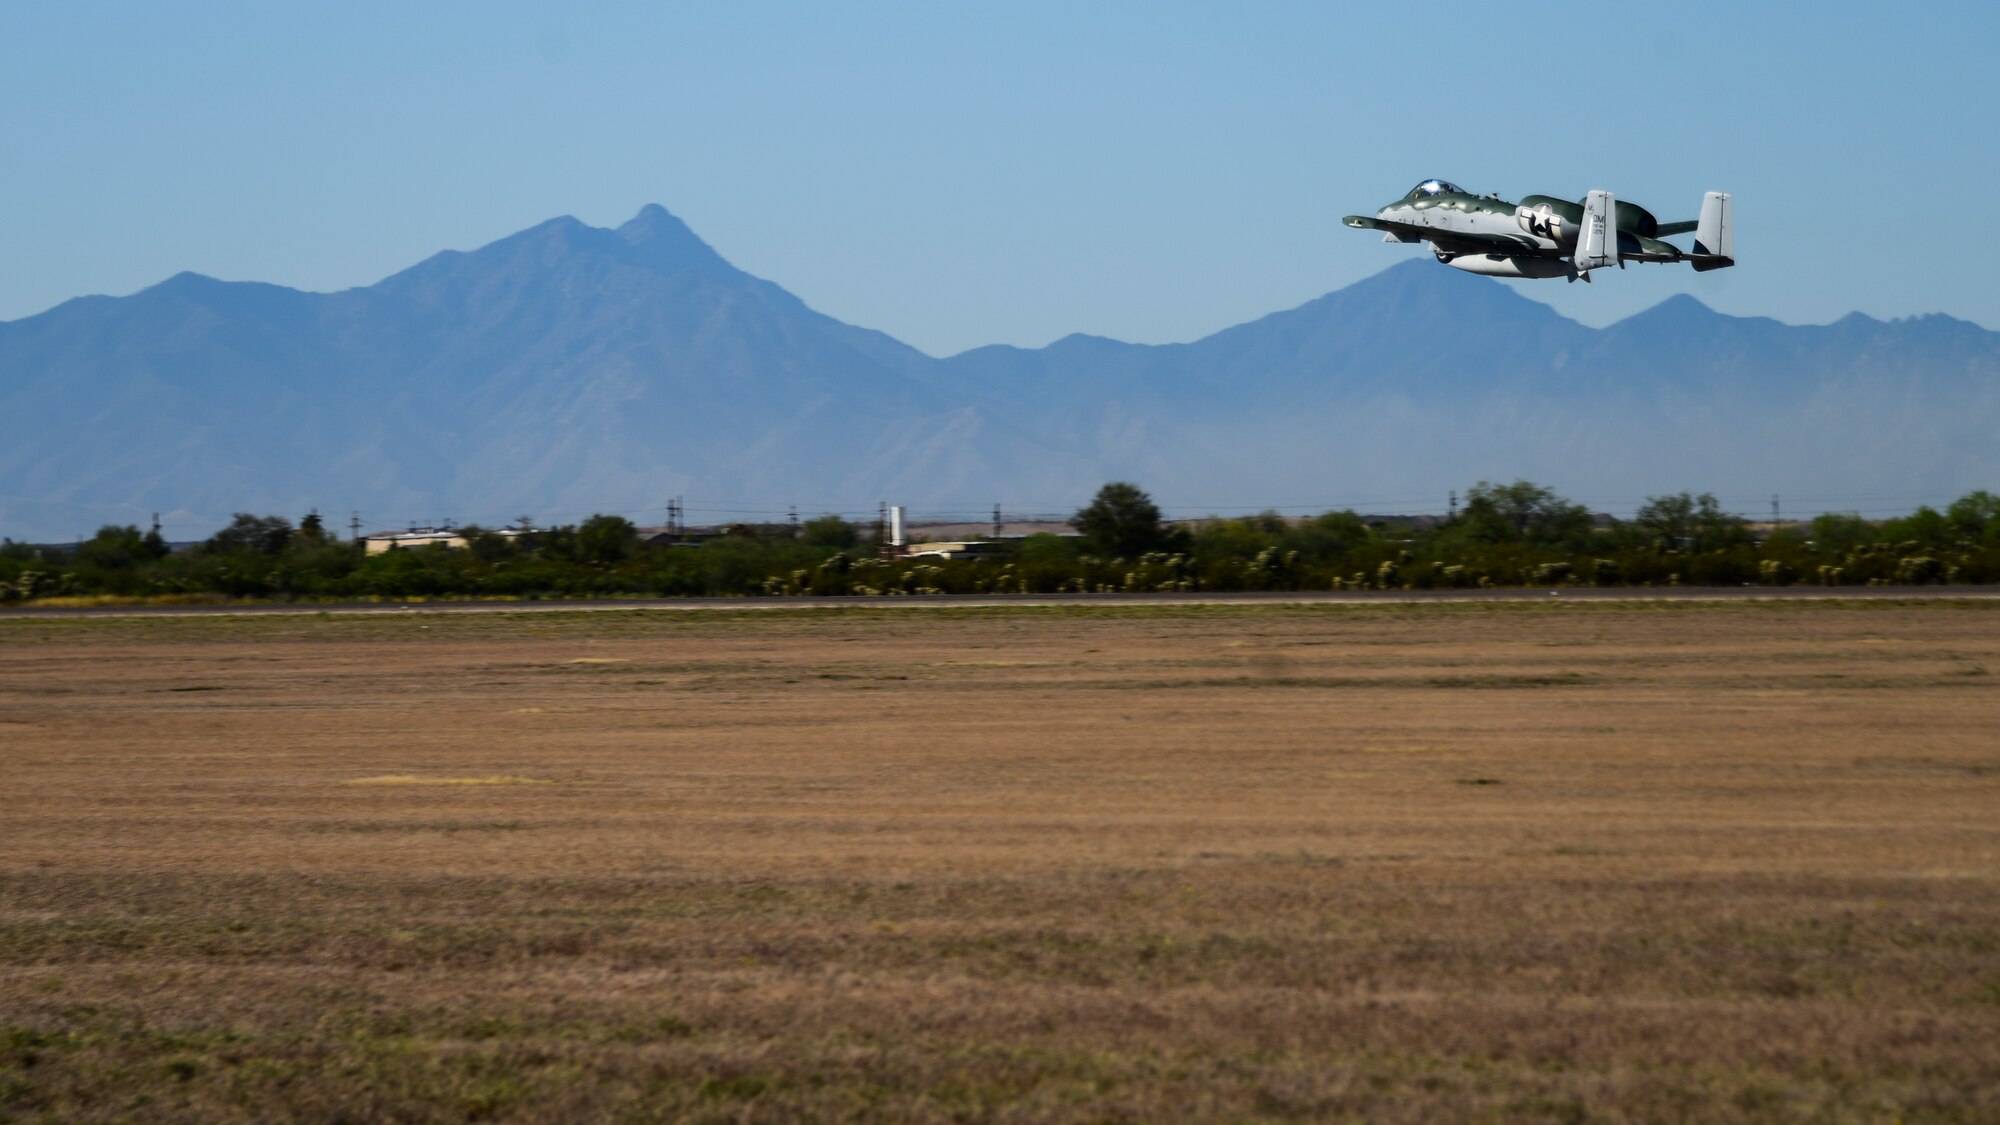 A photo of an A-10 taking off